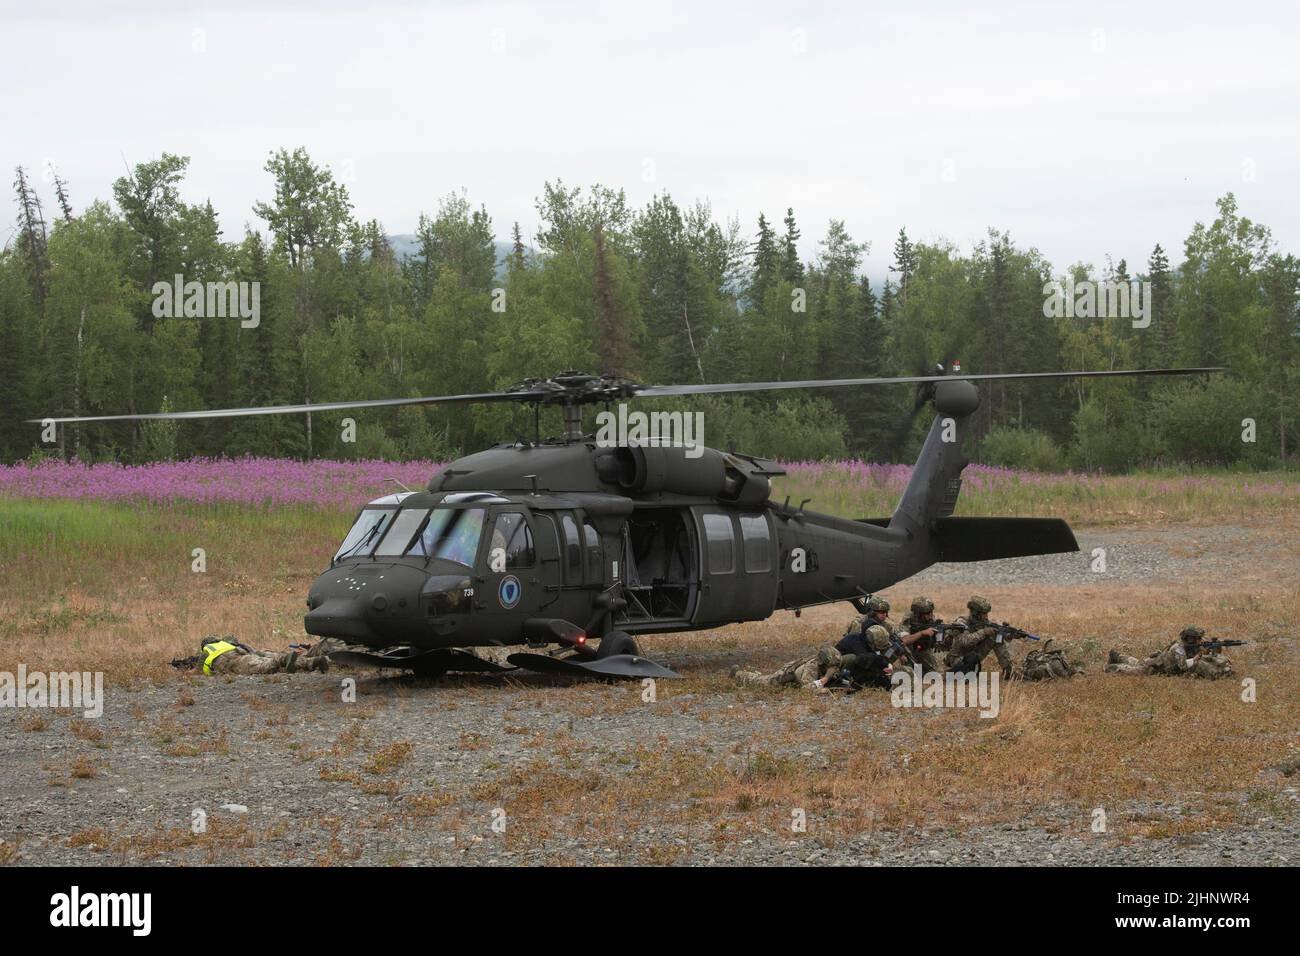 Special Agents from the Anchorage FBI Special Weapons and Tactics (SWAT) Team hold security after exiting an Alaska Army National Guard UH-60L Black Hawk at Joint Base Elmendorf-Richardson, Alaska, July 13, 2022. JBER’s expansive and austere training areas provided an ideal setting for local law enforcement SWAT Teams as they honed their rural operations skills, task planning, reconnaissance, helicopter safety procedures, land navigation, team movement and patrolling. (U.S. Air Force photo by Alejandro Peña) Stock Photo